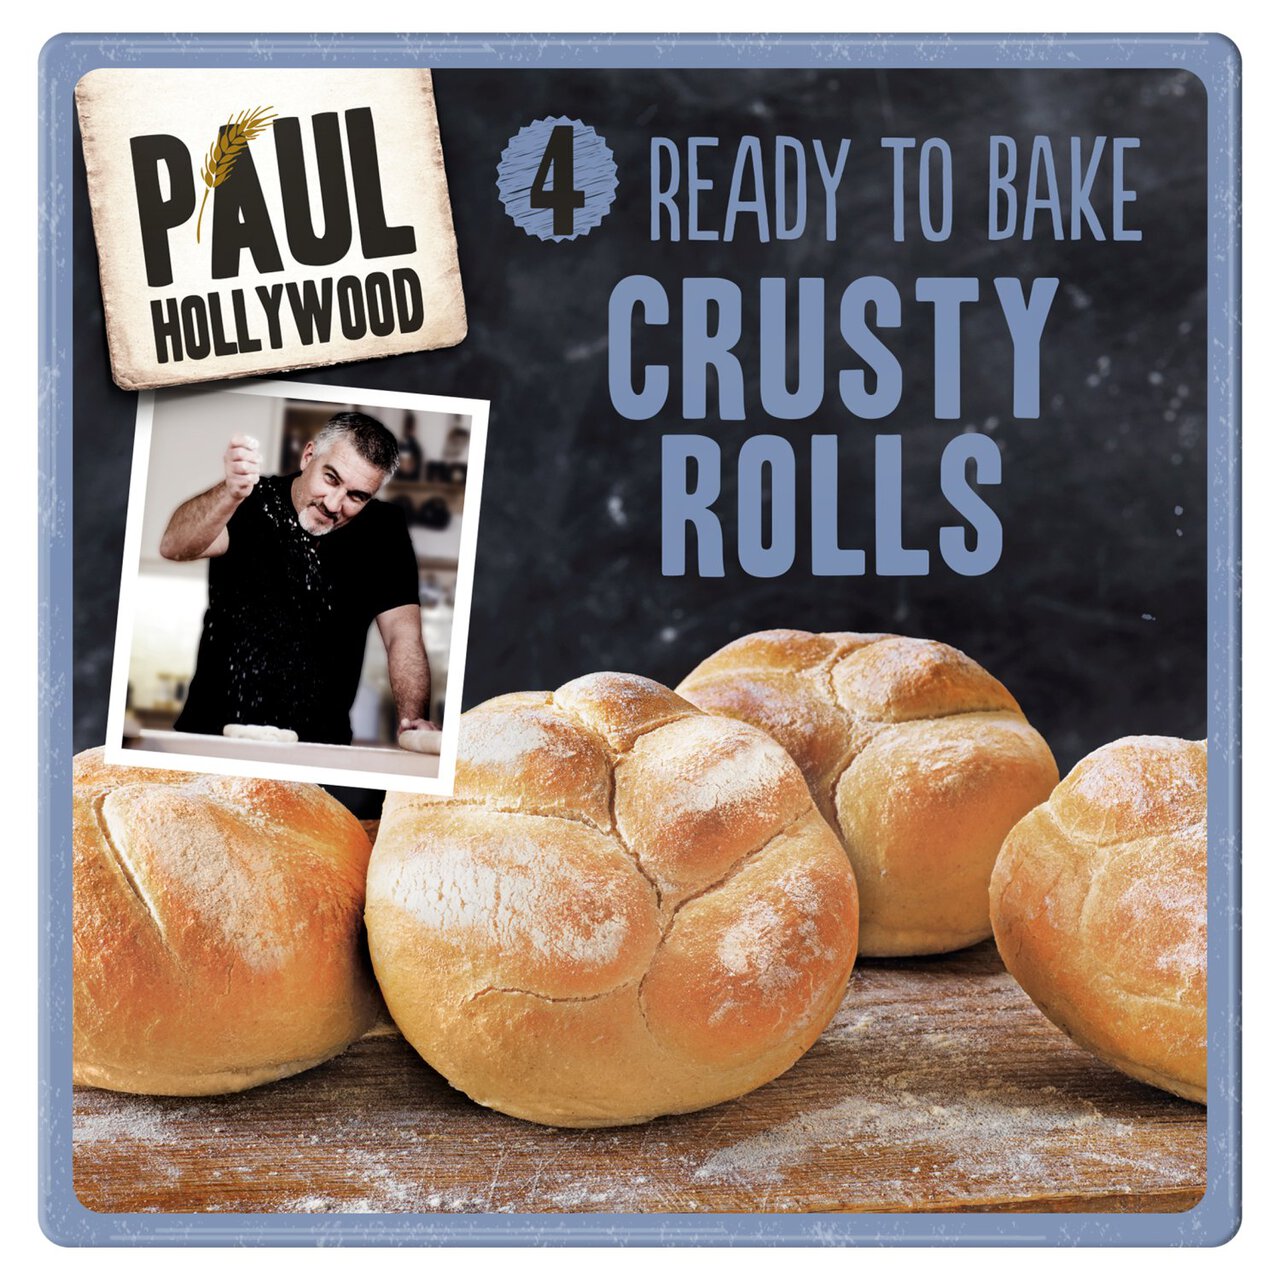 Paul Hollywood 4 Ready to Bake Crusty Rolls 4 per pack